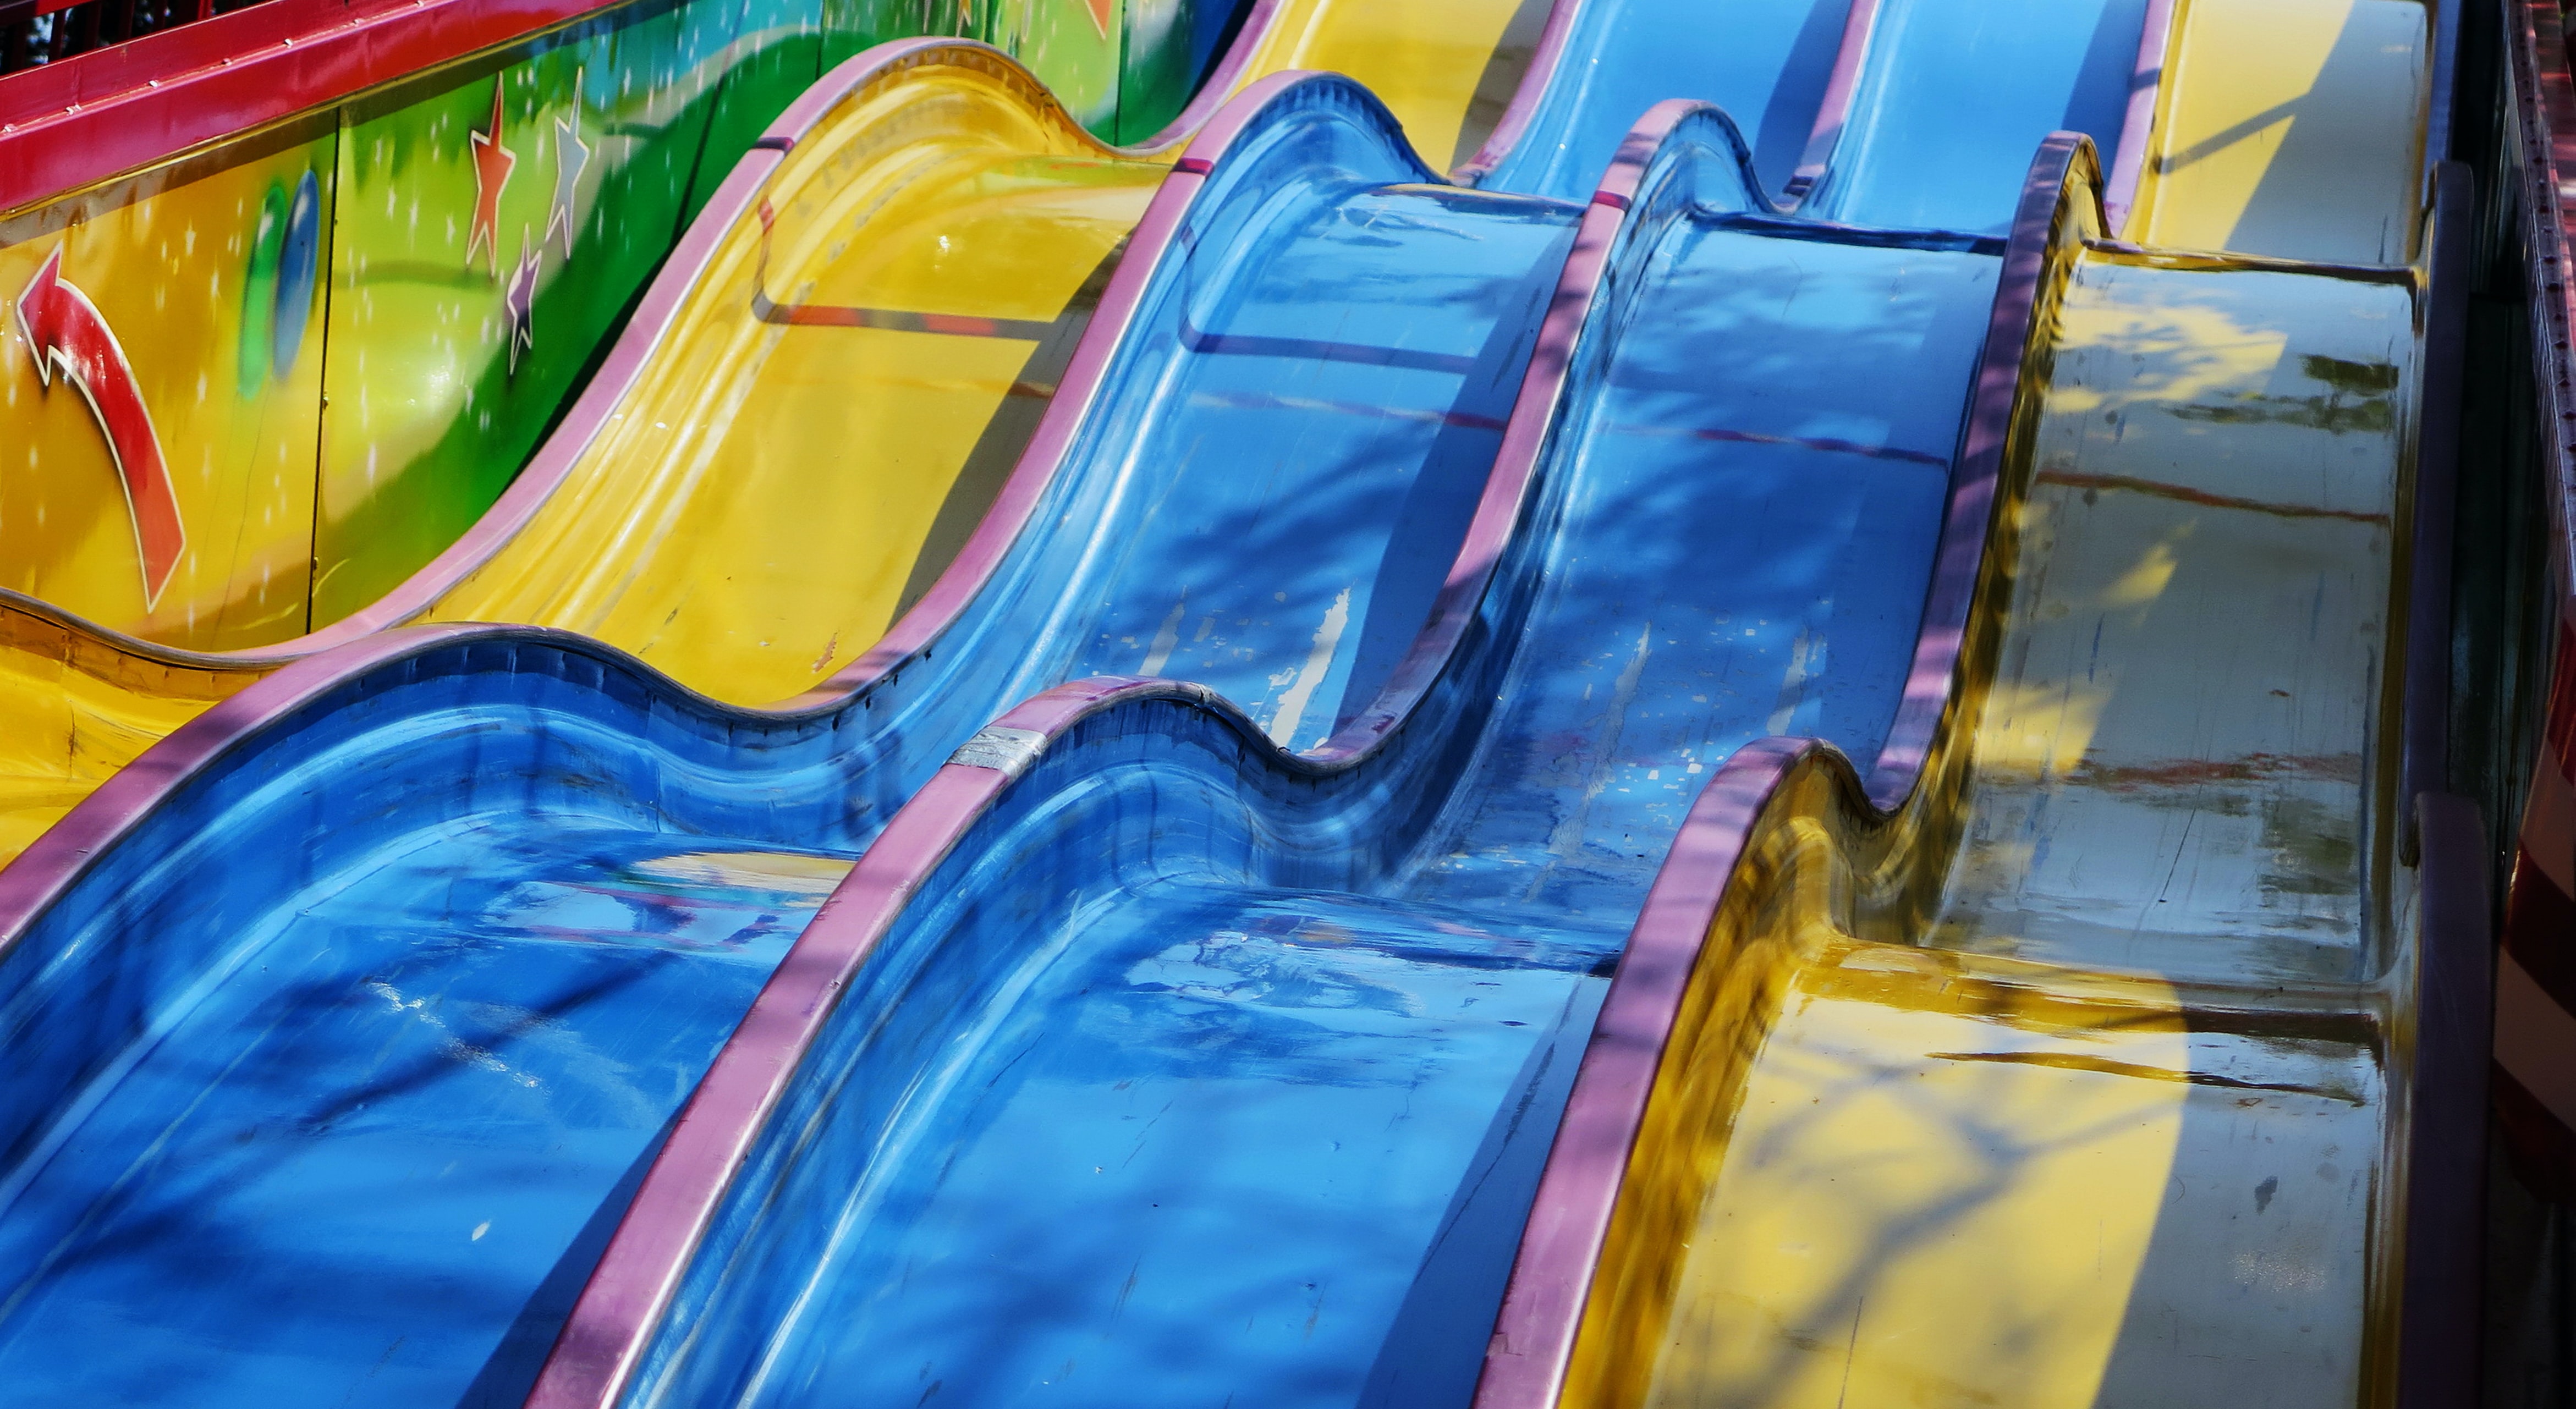 Wonder Waves Water Park -The Slides of Happiness